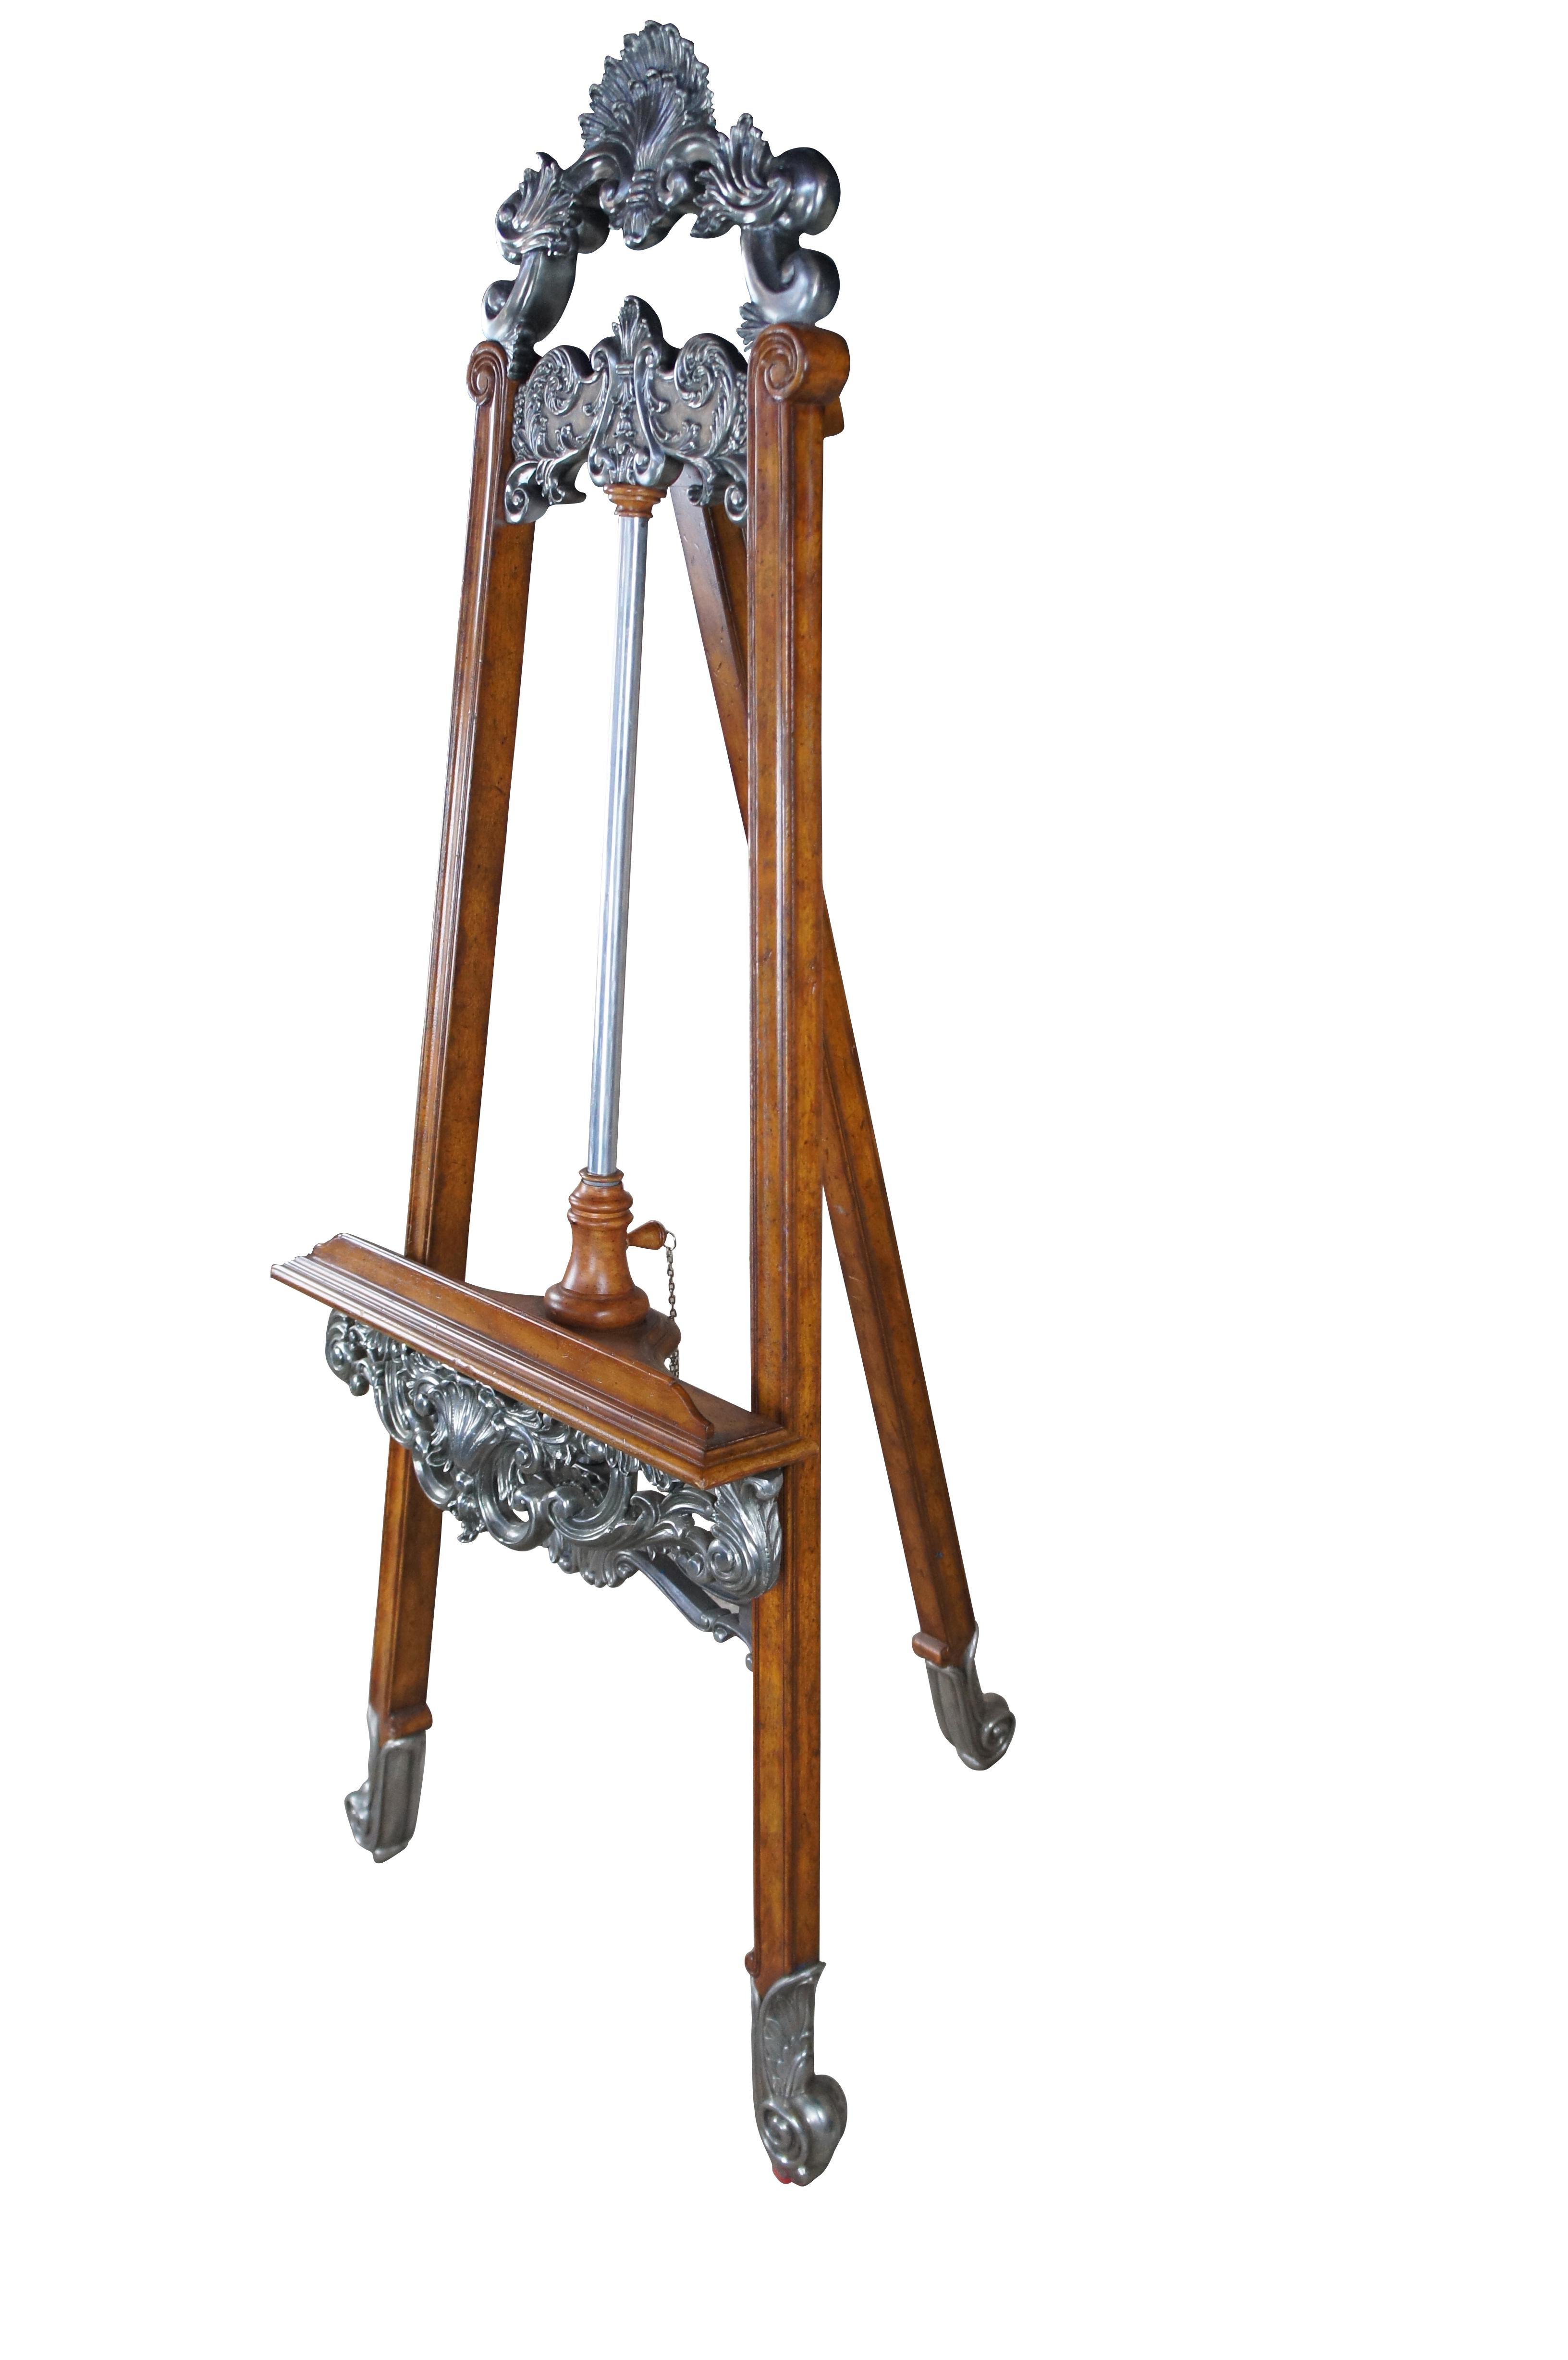 An exceptional Louis XV / Baroque Rococo inspired easel by La Barge. Features a mahogany frame with cast metal silvertone relief. The stand adjusts via latch along the back of the aluminum center. Perfect for display in any setting.

Dimensions:
28